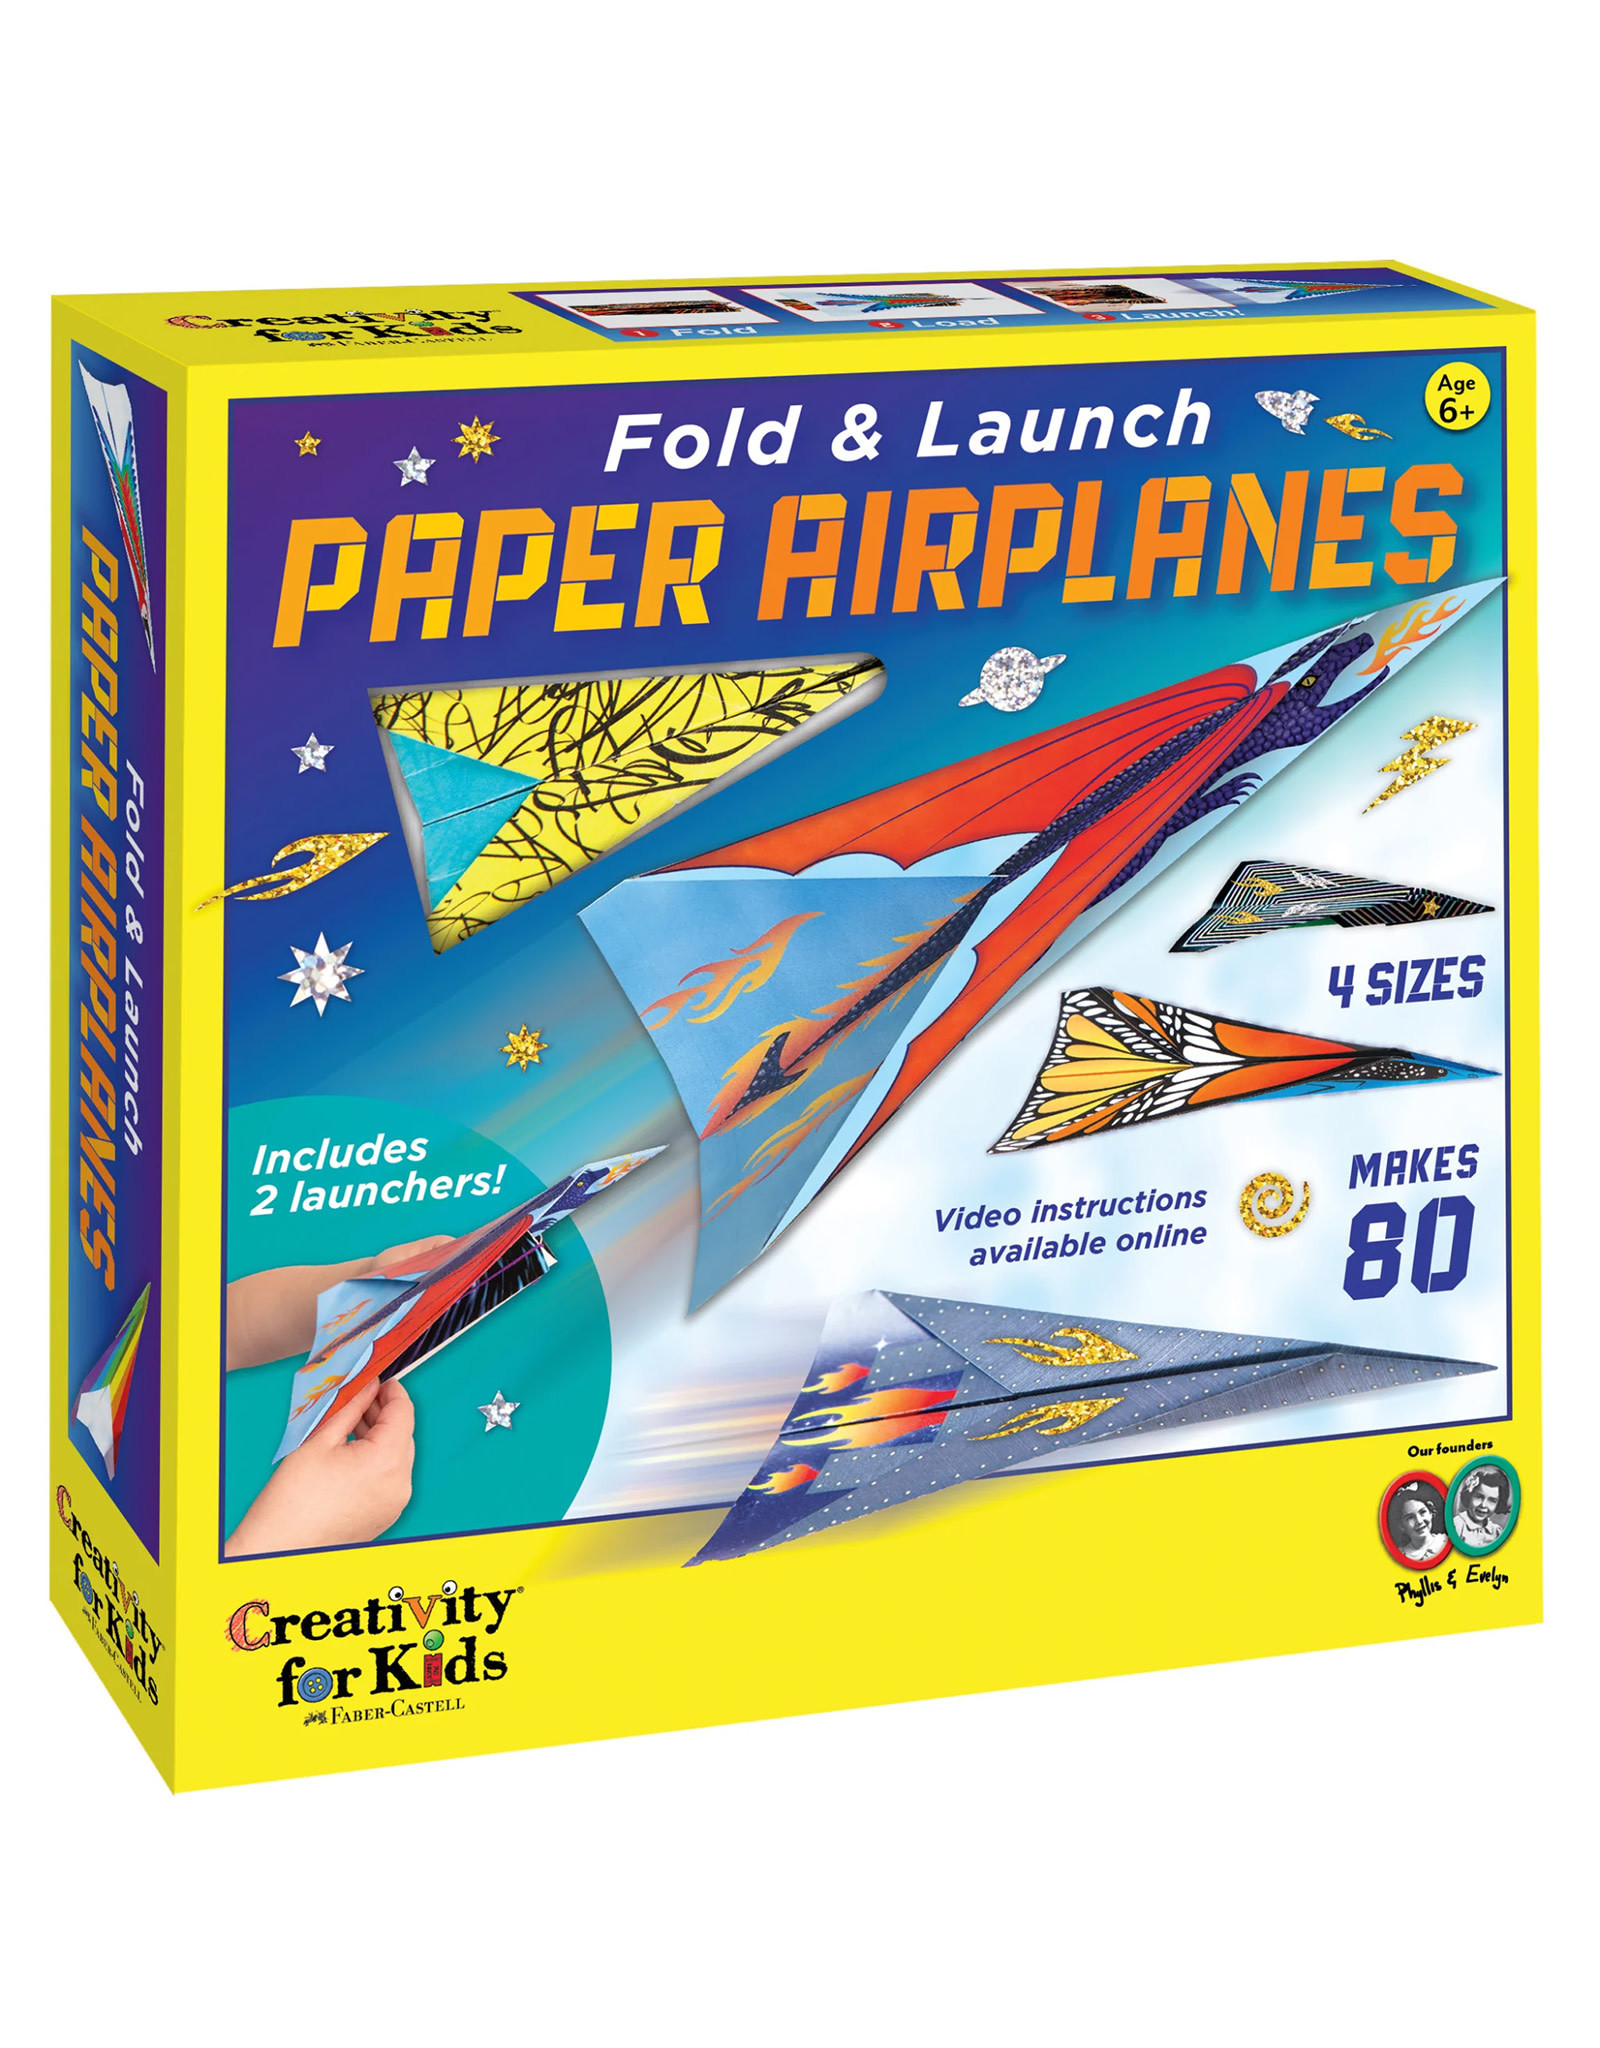 FABER-CASTELL Faber-Castell Fold & Launch Paper Airplanes, 80 sheets